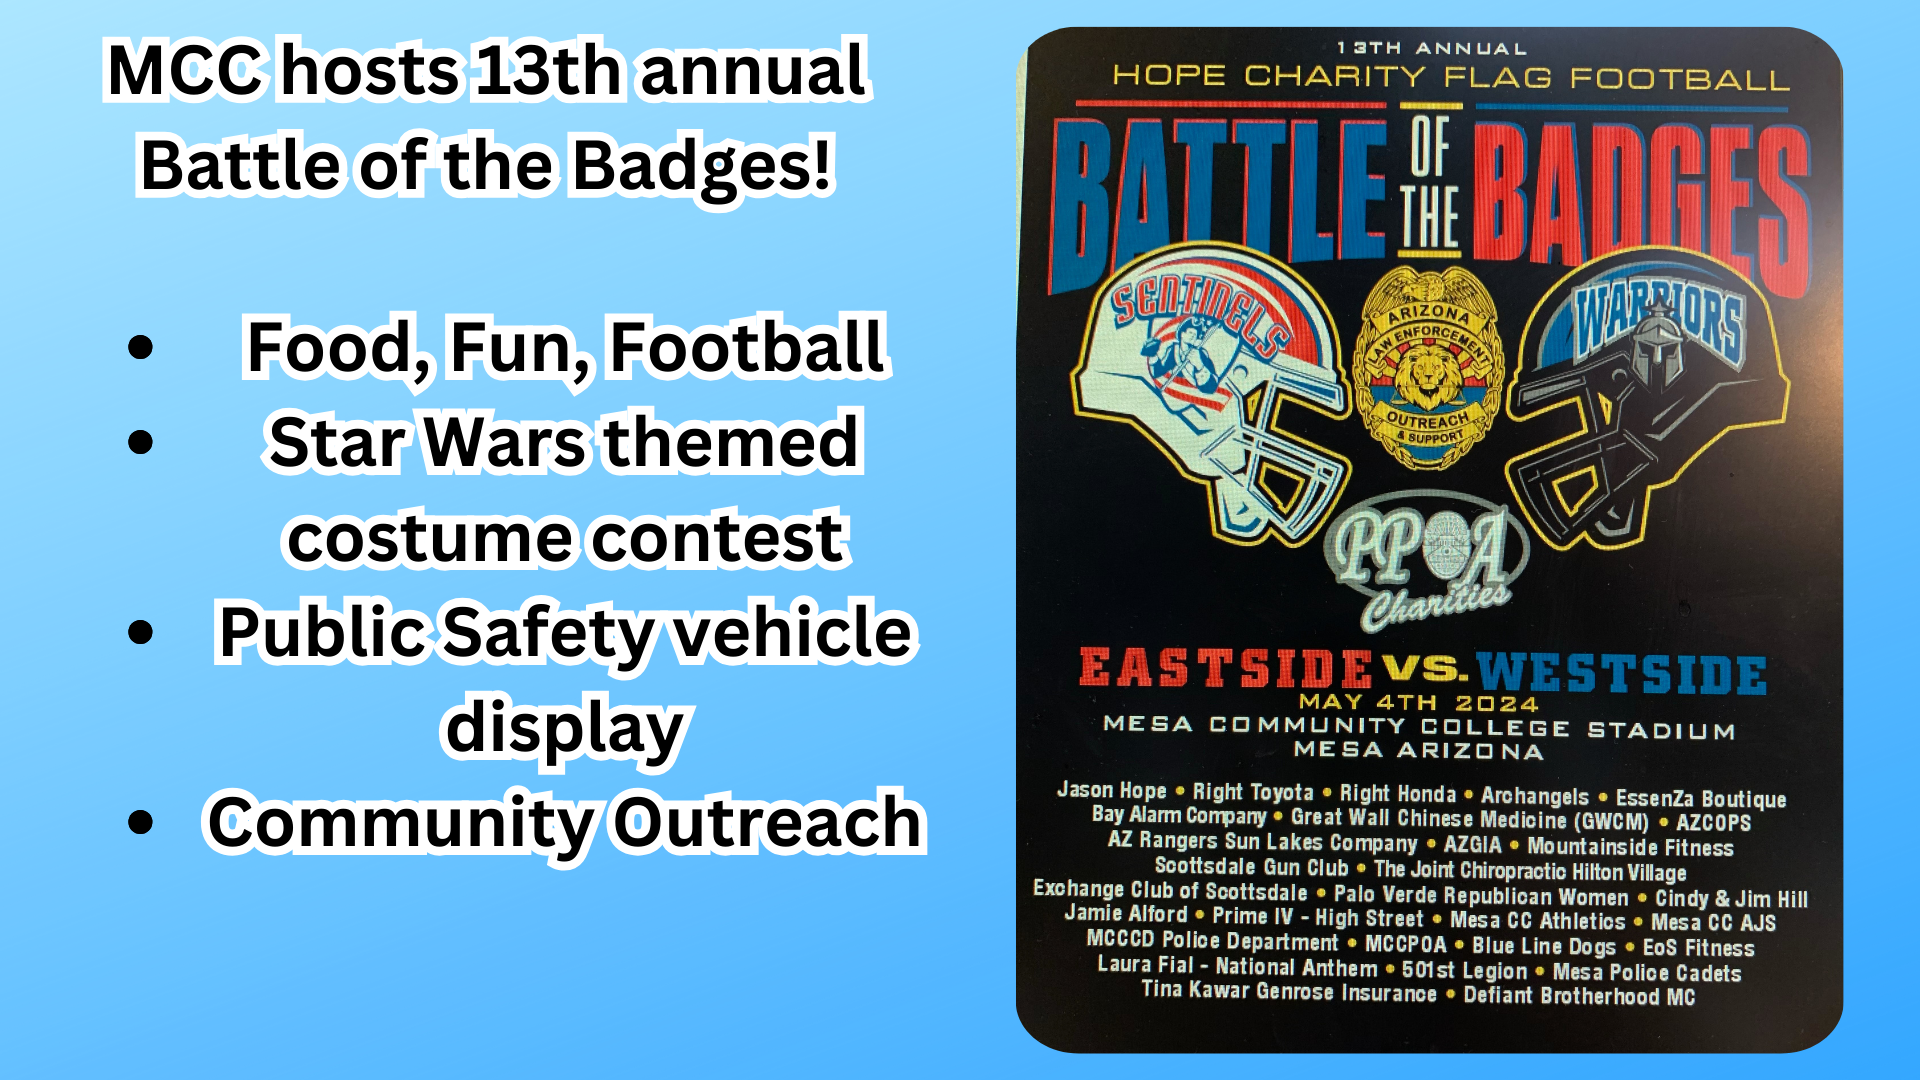 13th annual Battle of the Badges takes place at MCC on May 4